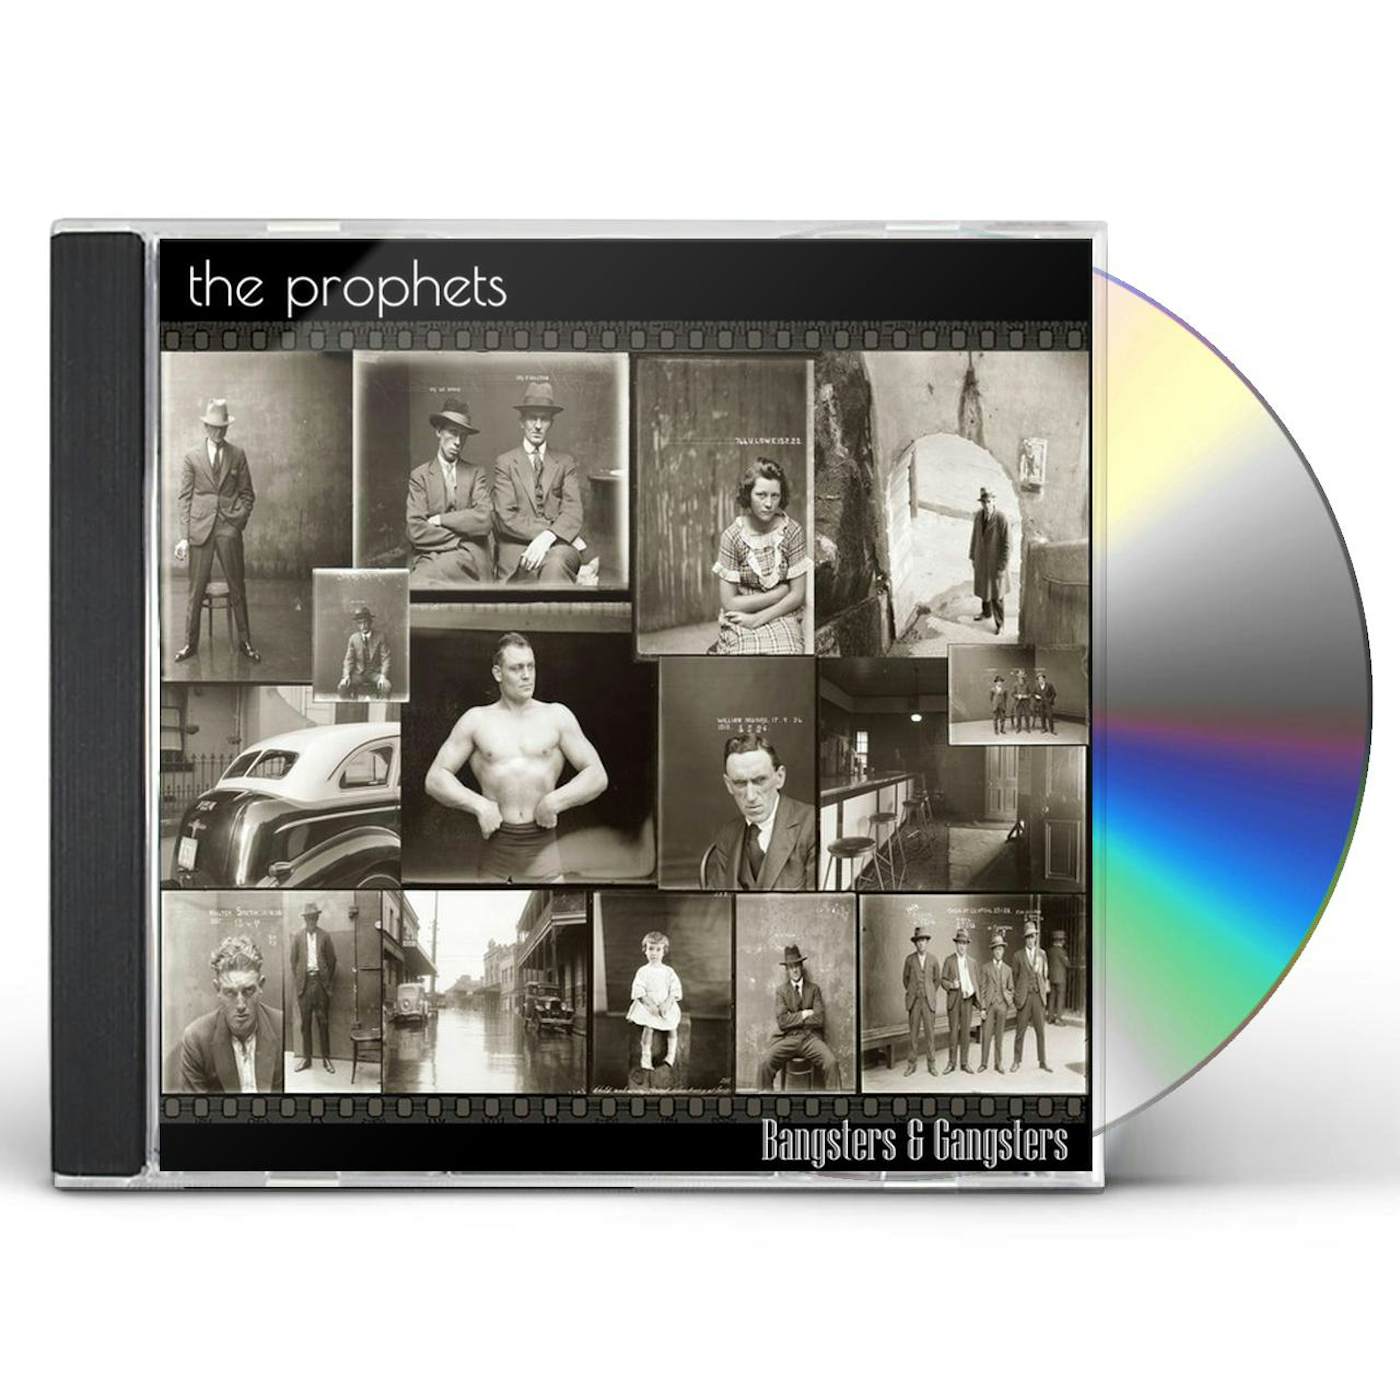 The Prophets BANGSTERS & GANGSTERS CD